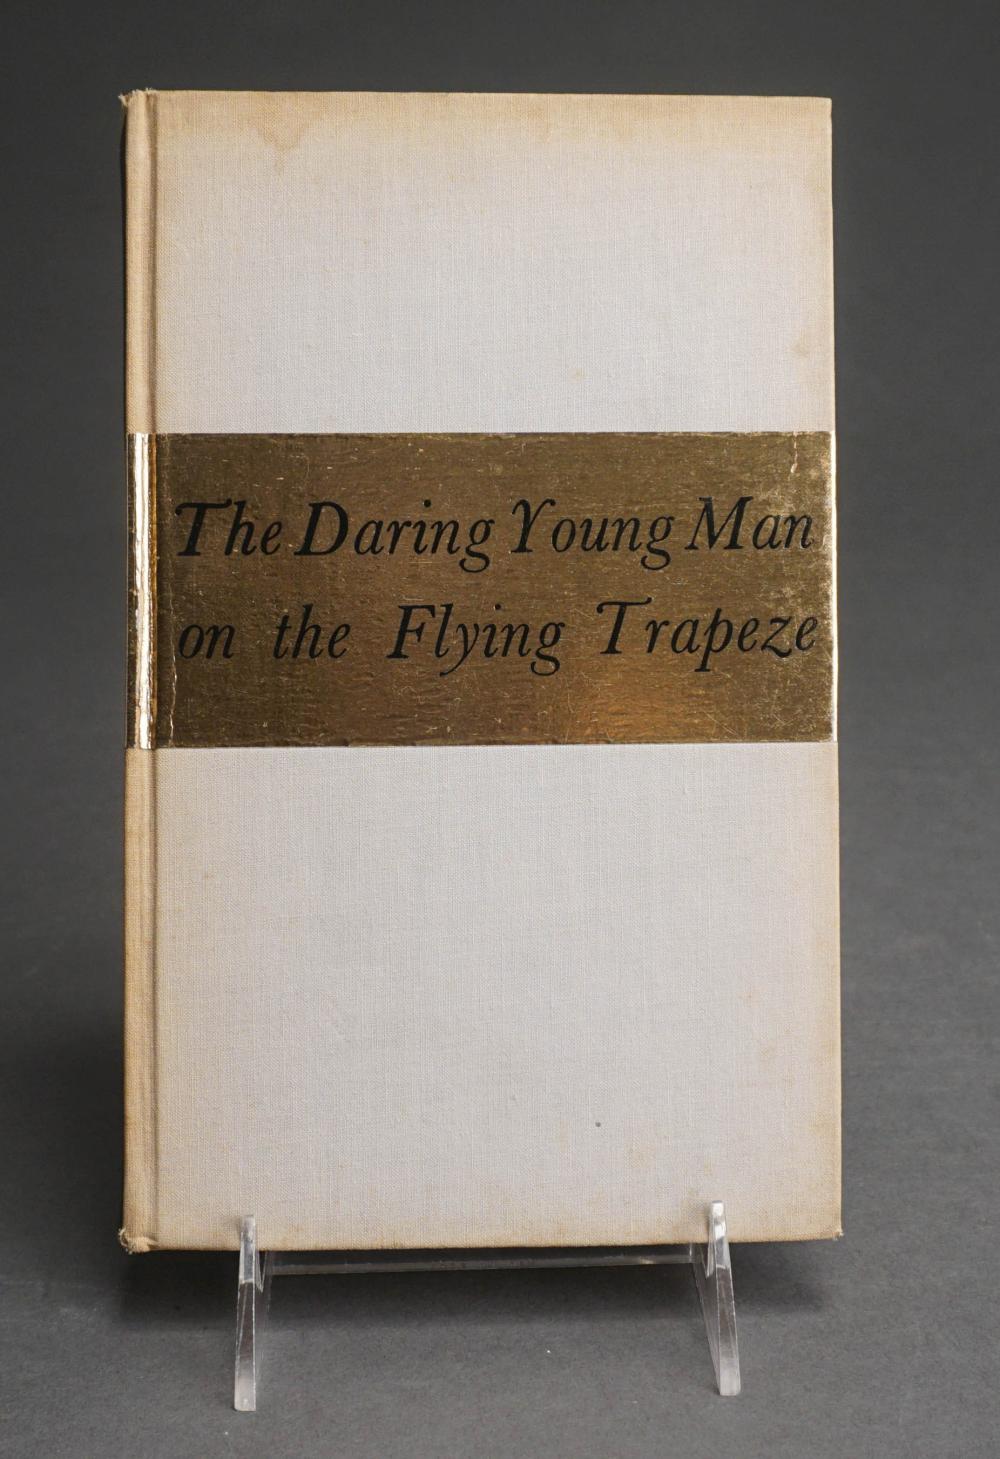 'THE DARING YOUNG MAN ON THE FLYING